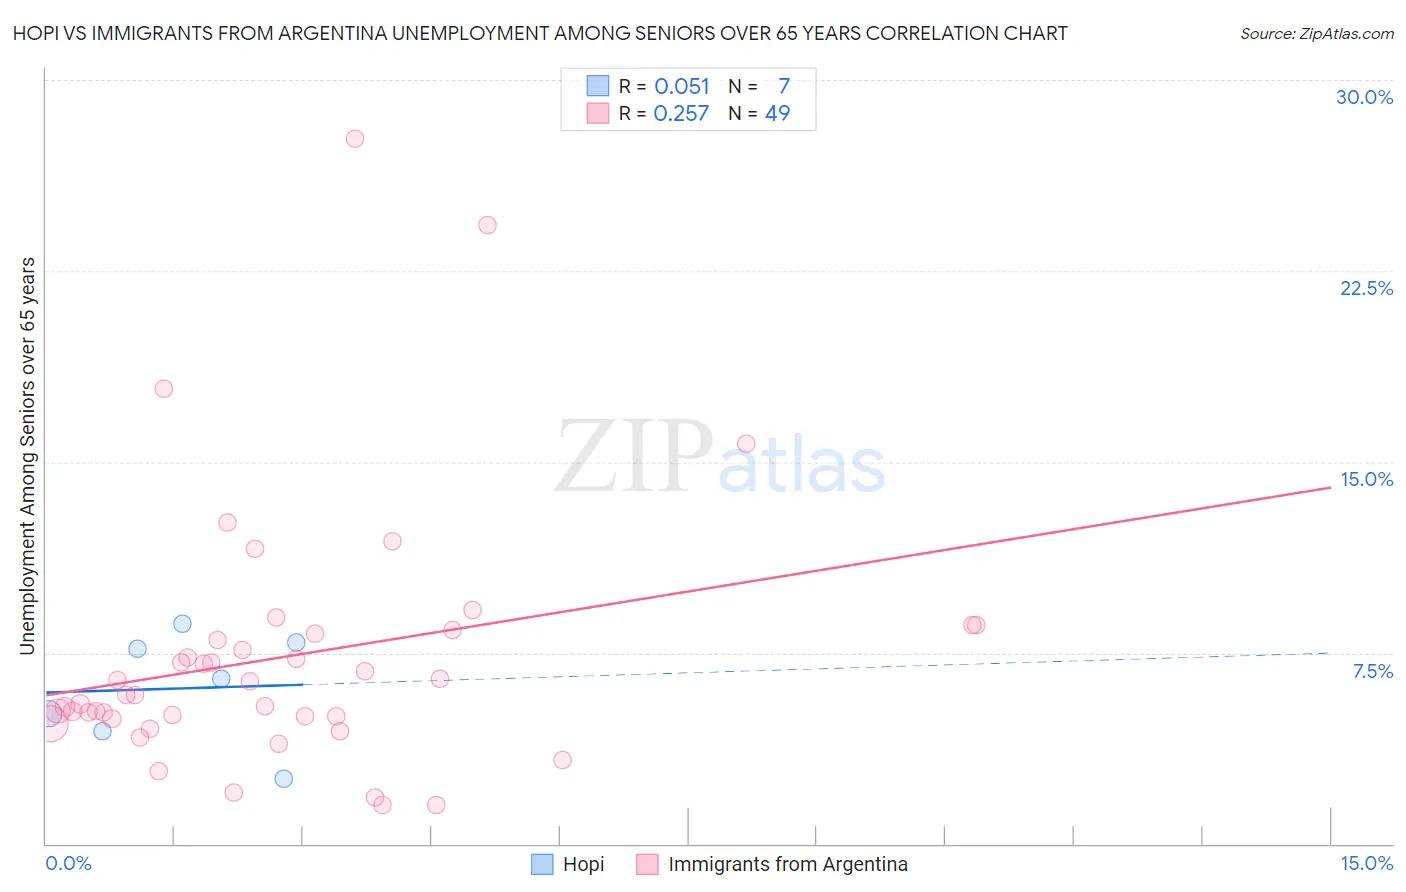 Hopi vs Immigrants from Argentina Unemployment Among Seniors over 65 years